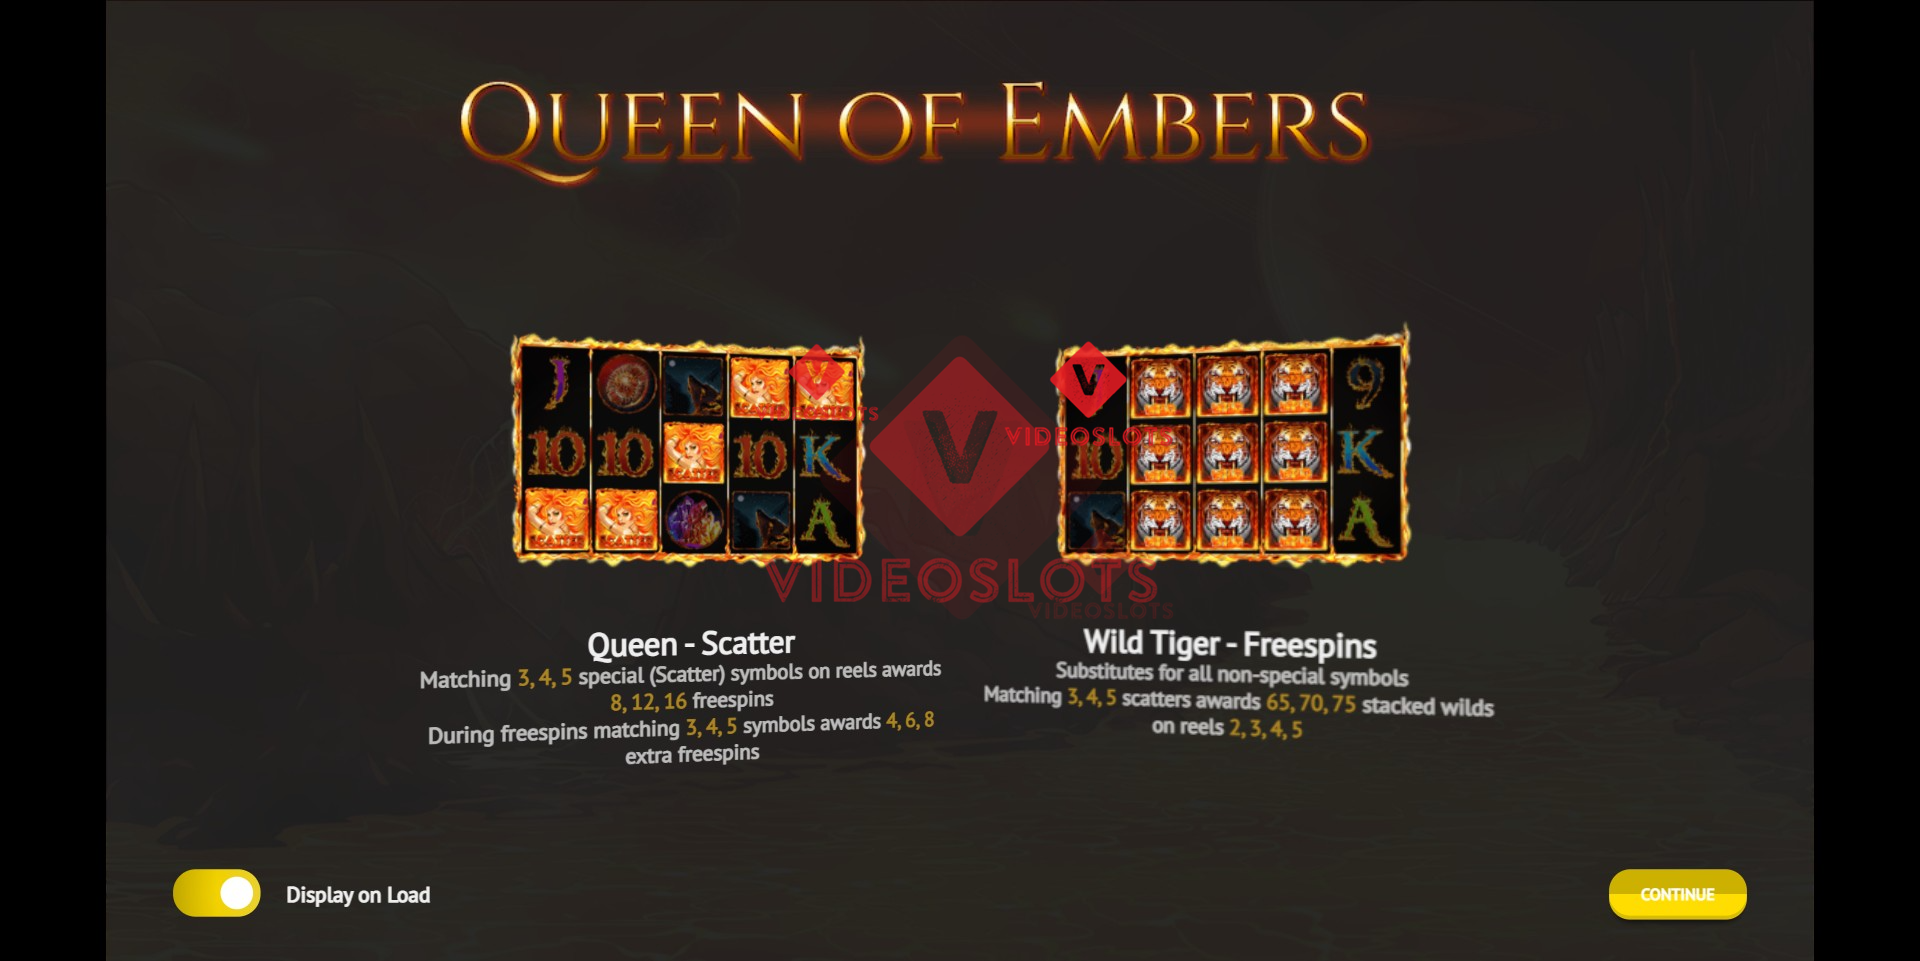 Queen of Embers slot game intro by 1X2 Gaming